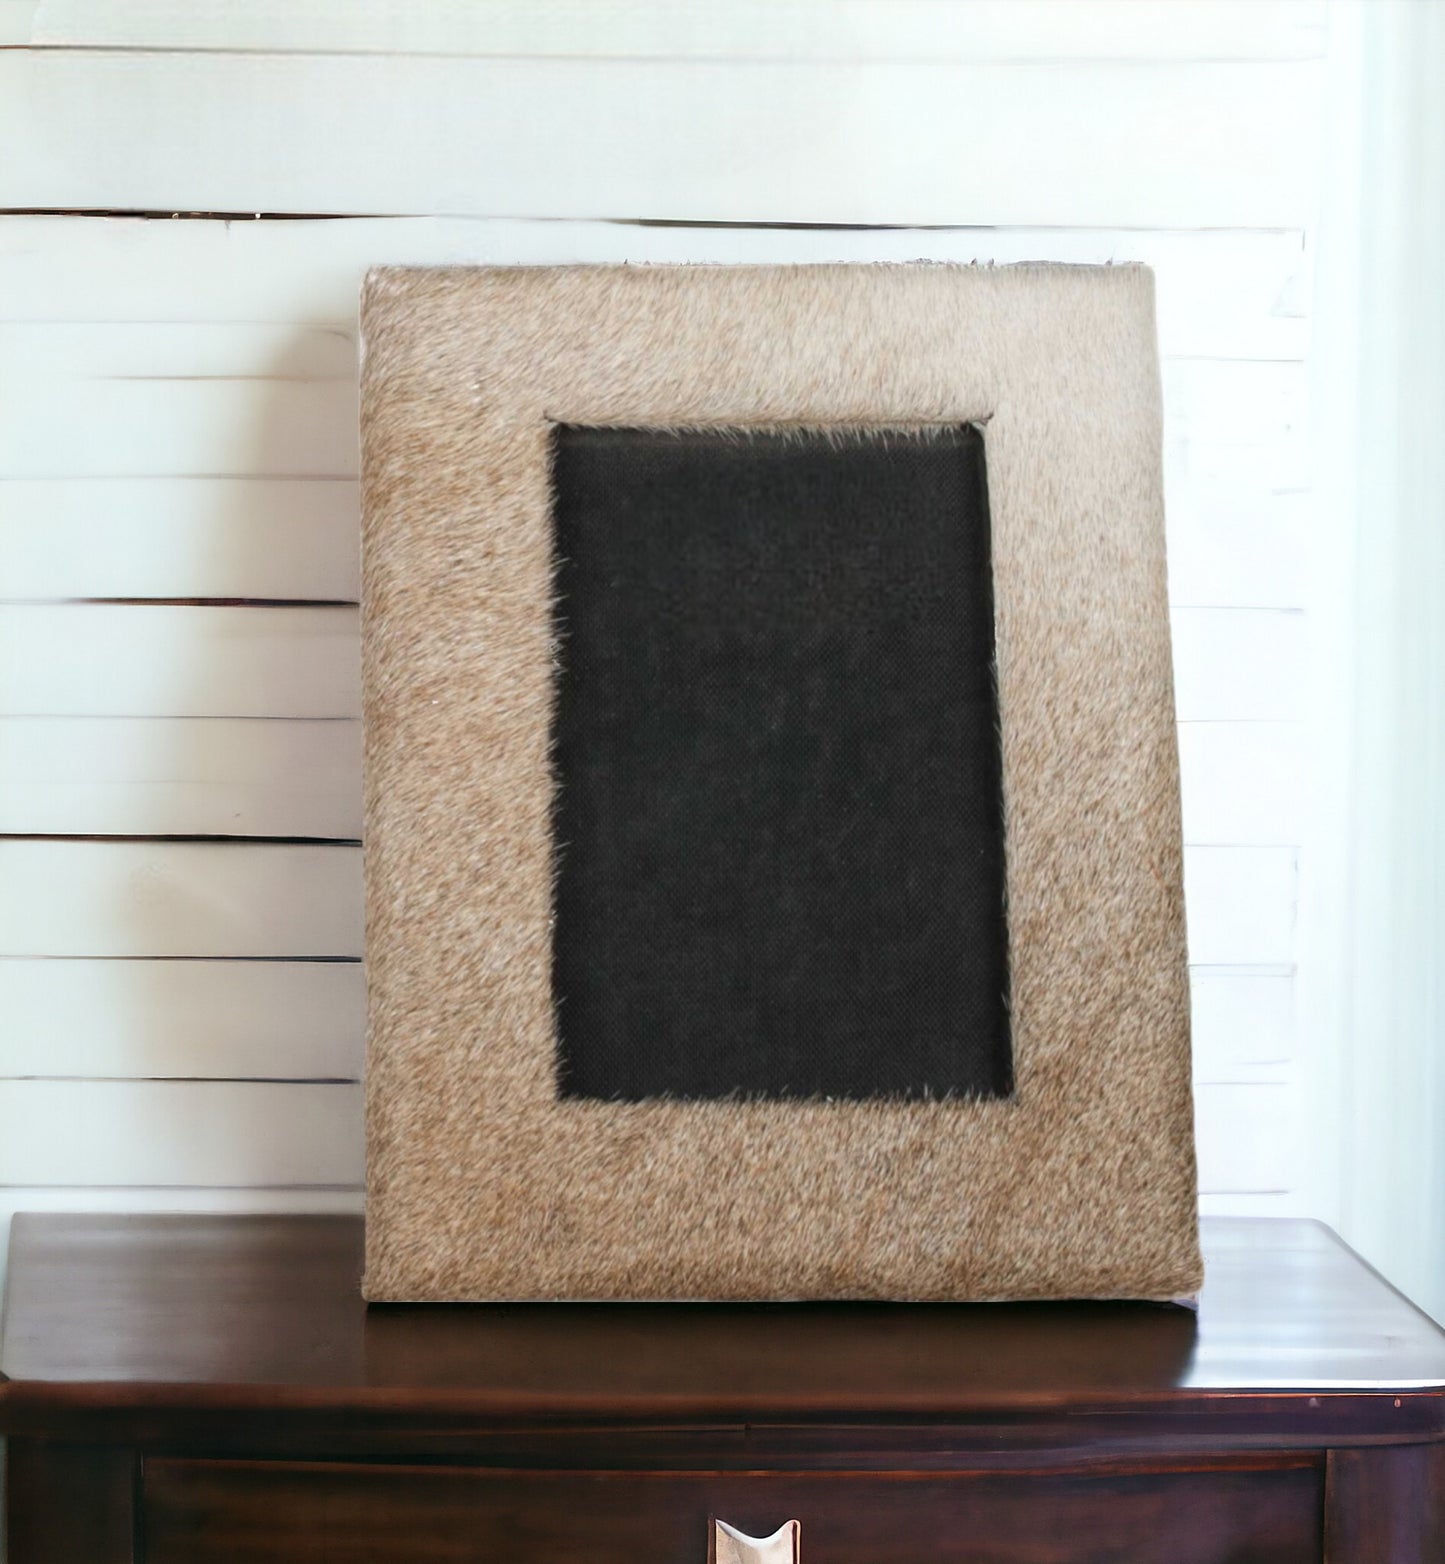 8" x 10" Gray Cowhide Tabletop Picture Frame